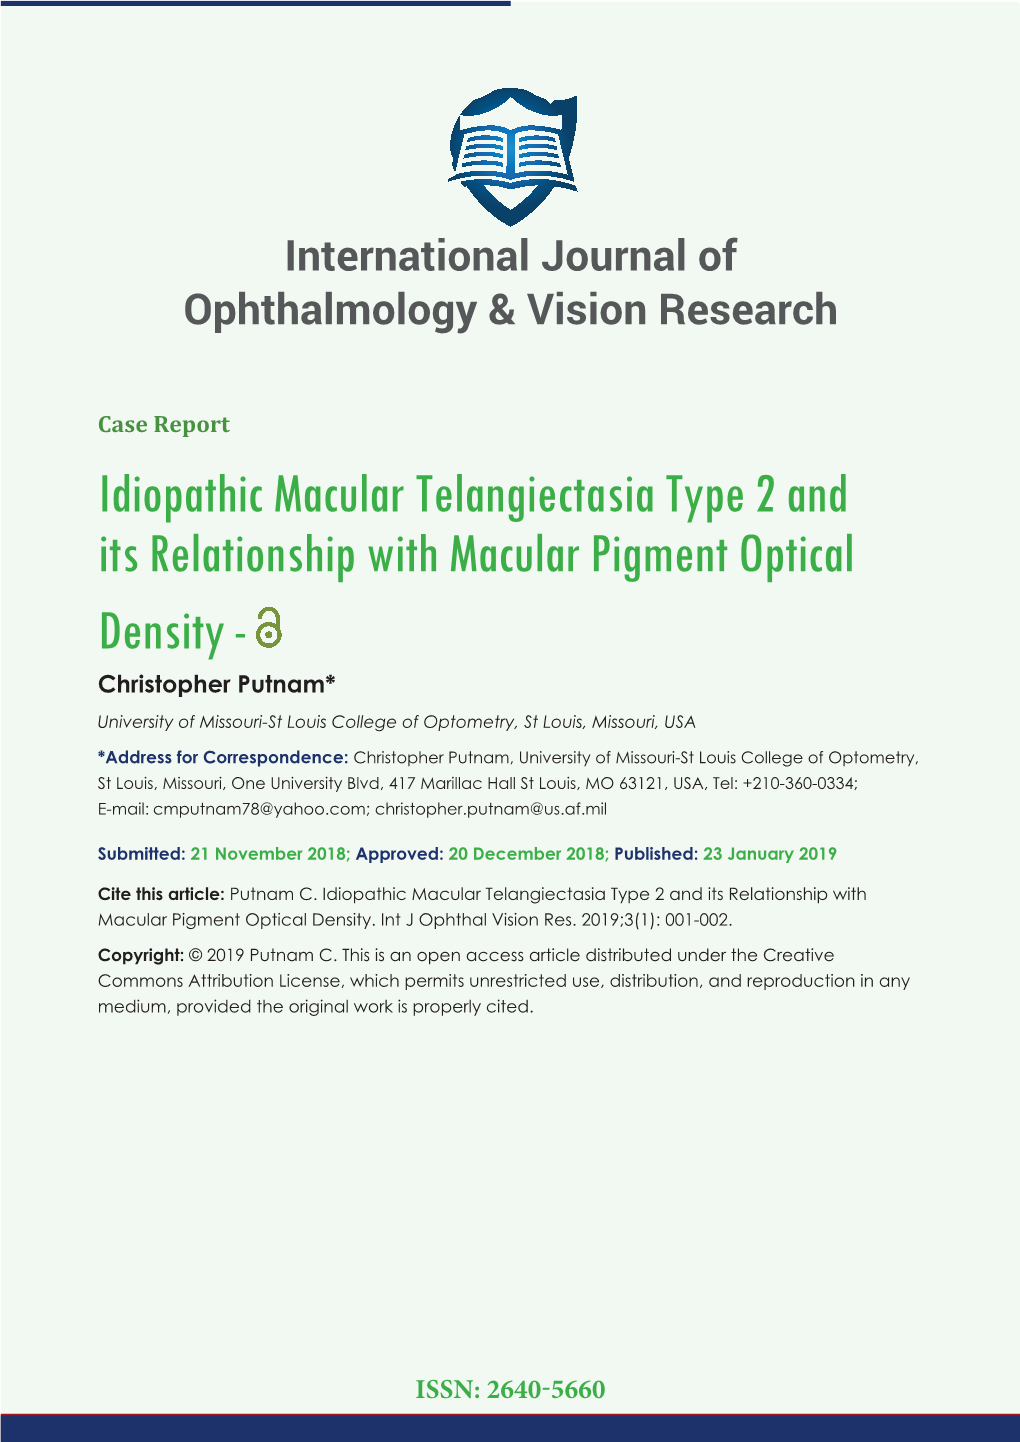 Idiopathic Macular Telangiectasia Type 2 and Its Relationship With